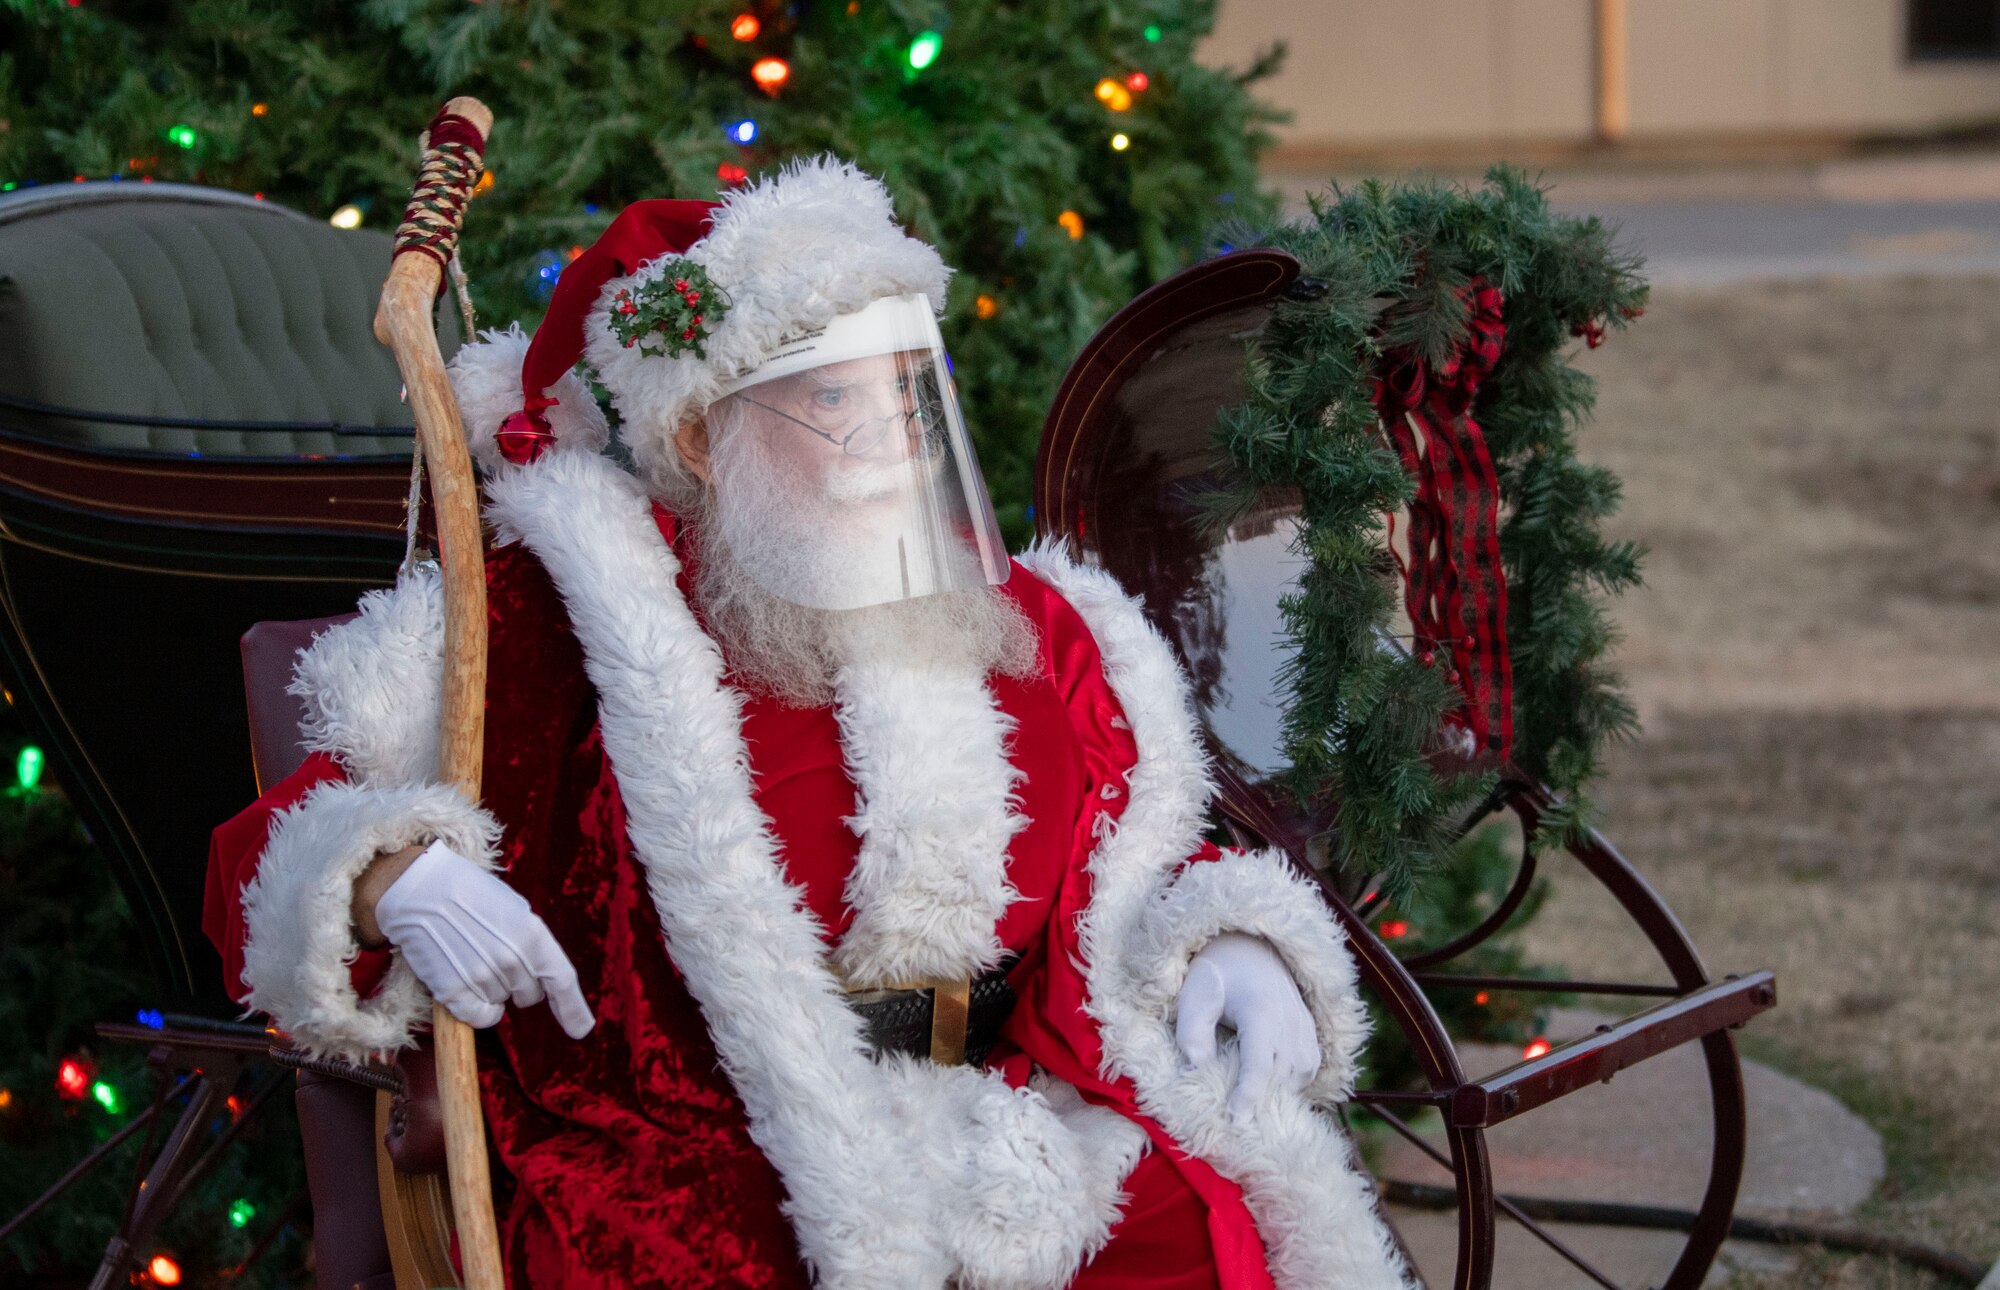 Santa Claus waits to greet family members during the annual holiday tree lighting event, Dec. 3, 2020, at Altus Air Force Base, Oklahoma. To help prevent the spread of COVID-19, Santa wore a face shield while at event. (U.S. Air Force photo by Airman 1st Class Amanda Lovelace)